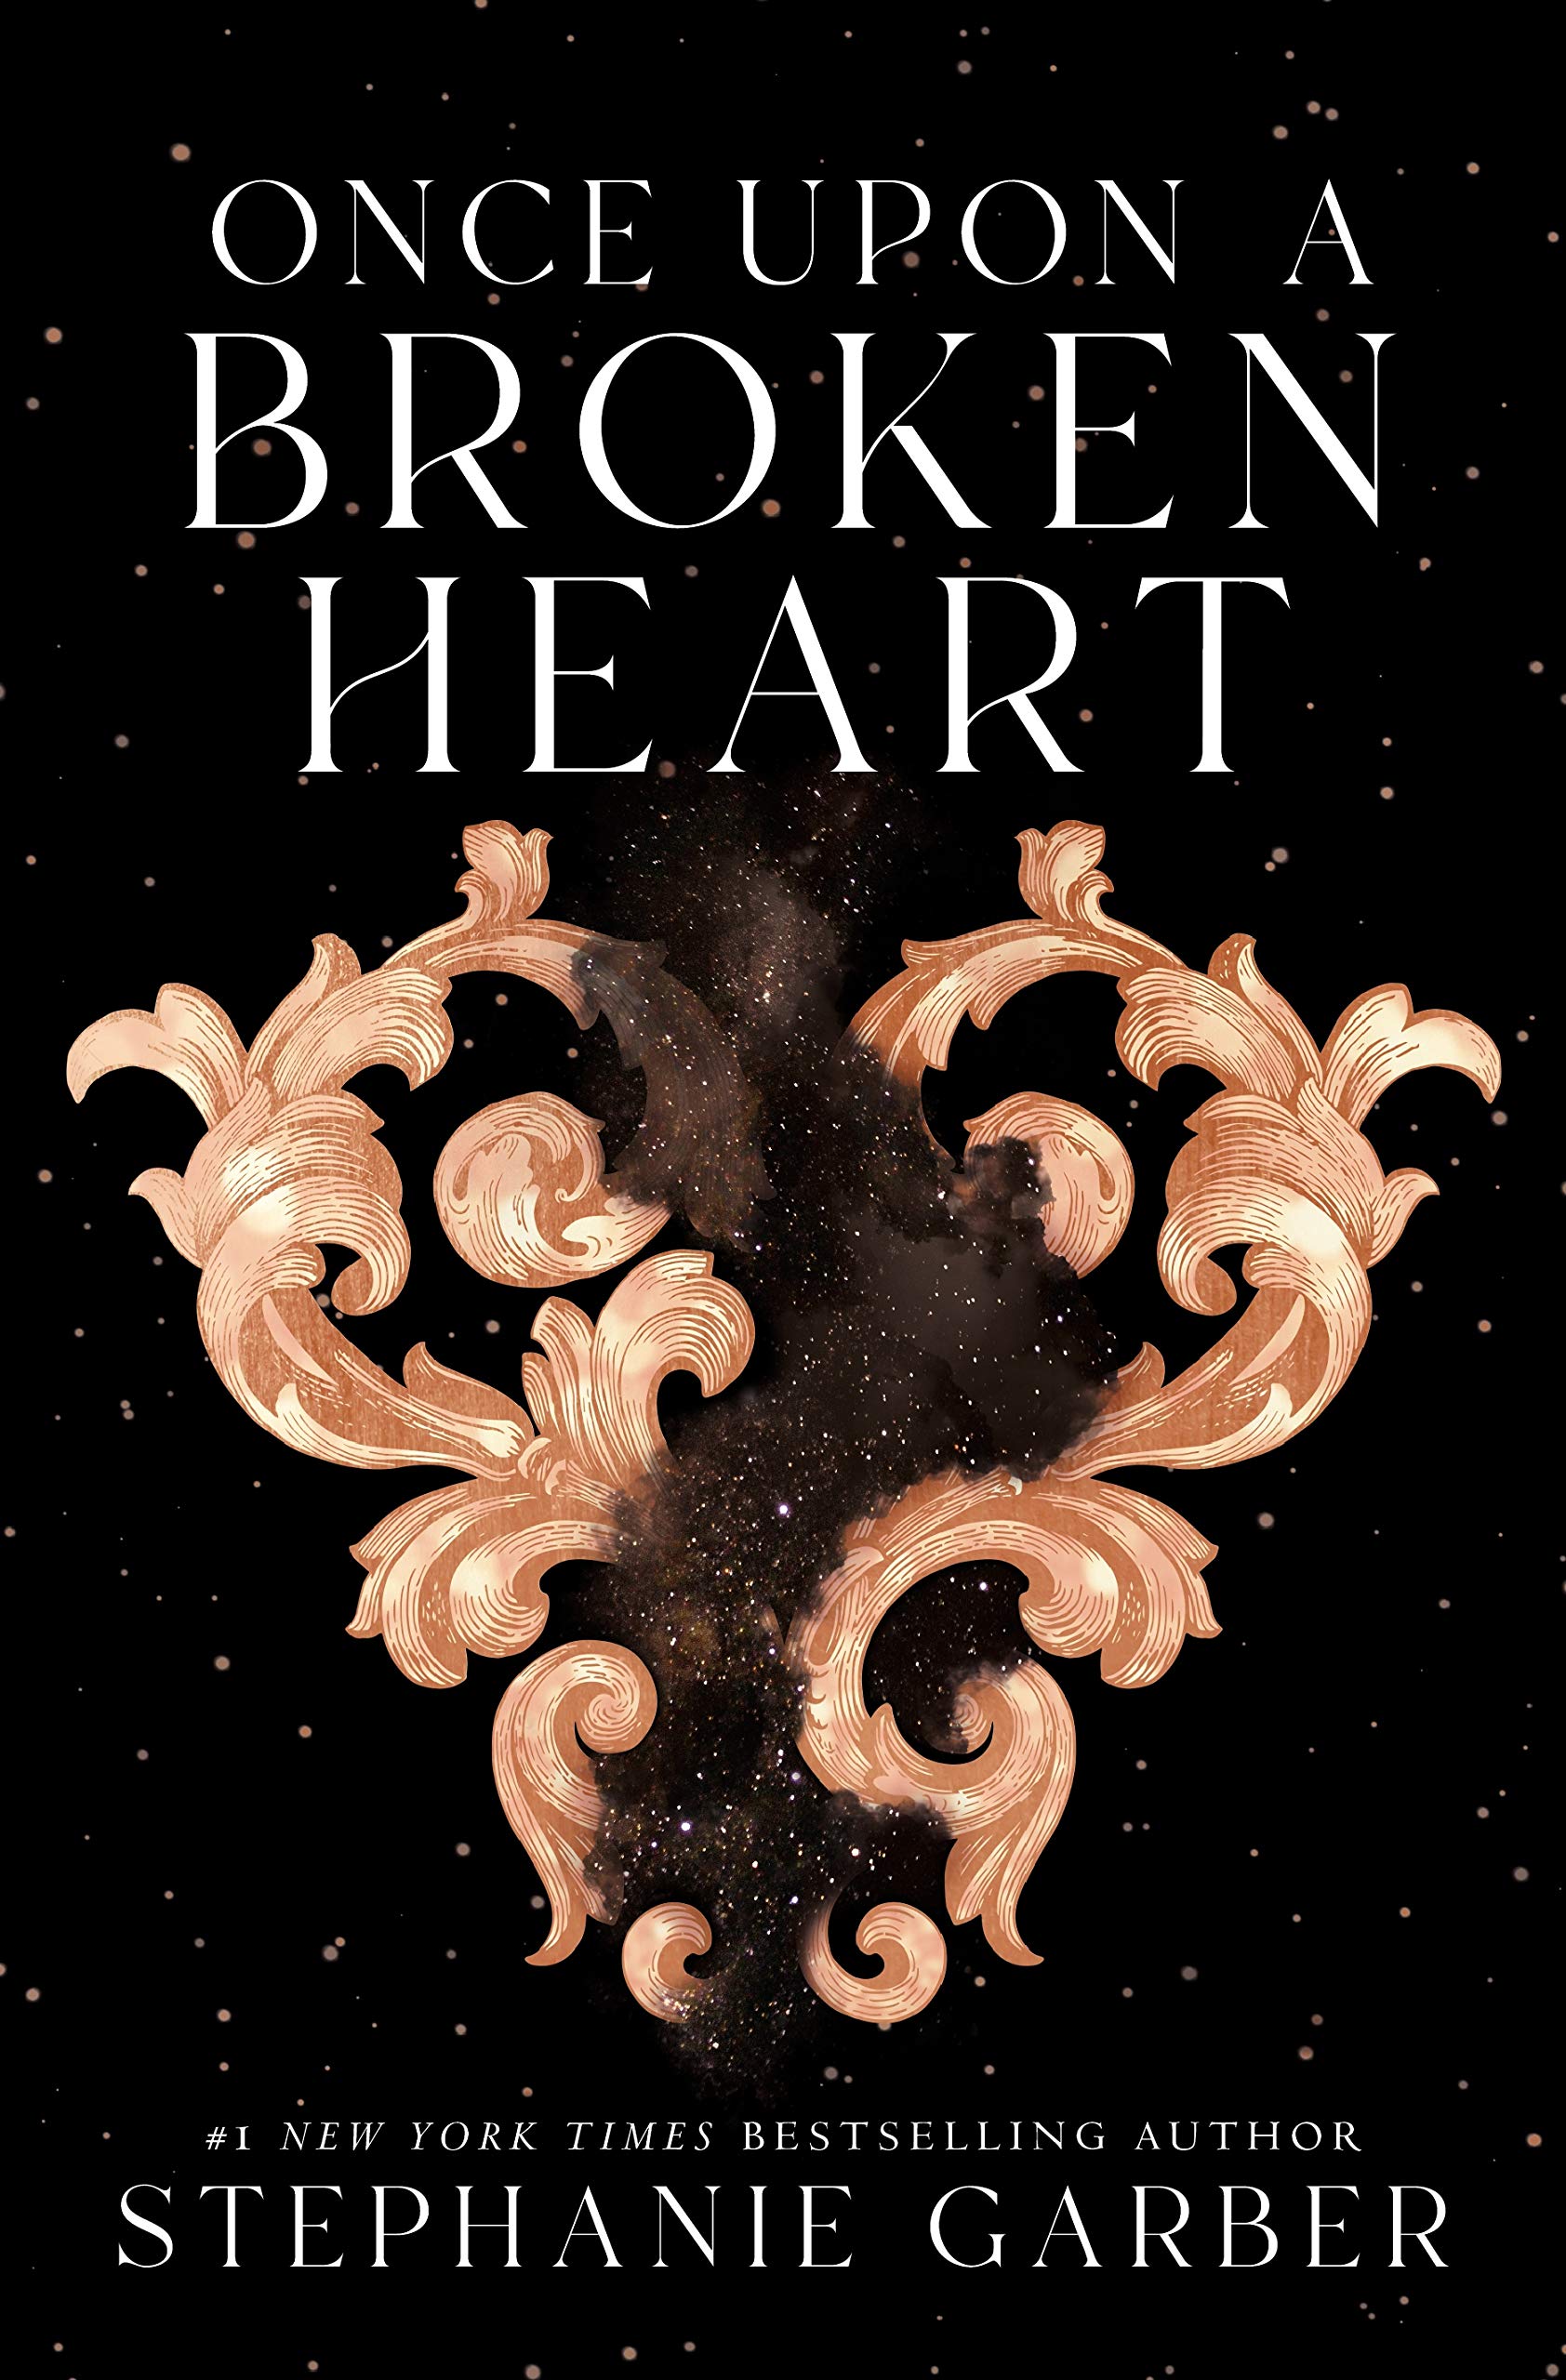 Once Upon A Broken Heart (Once Upon a Broken Heart 1)